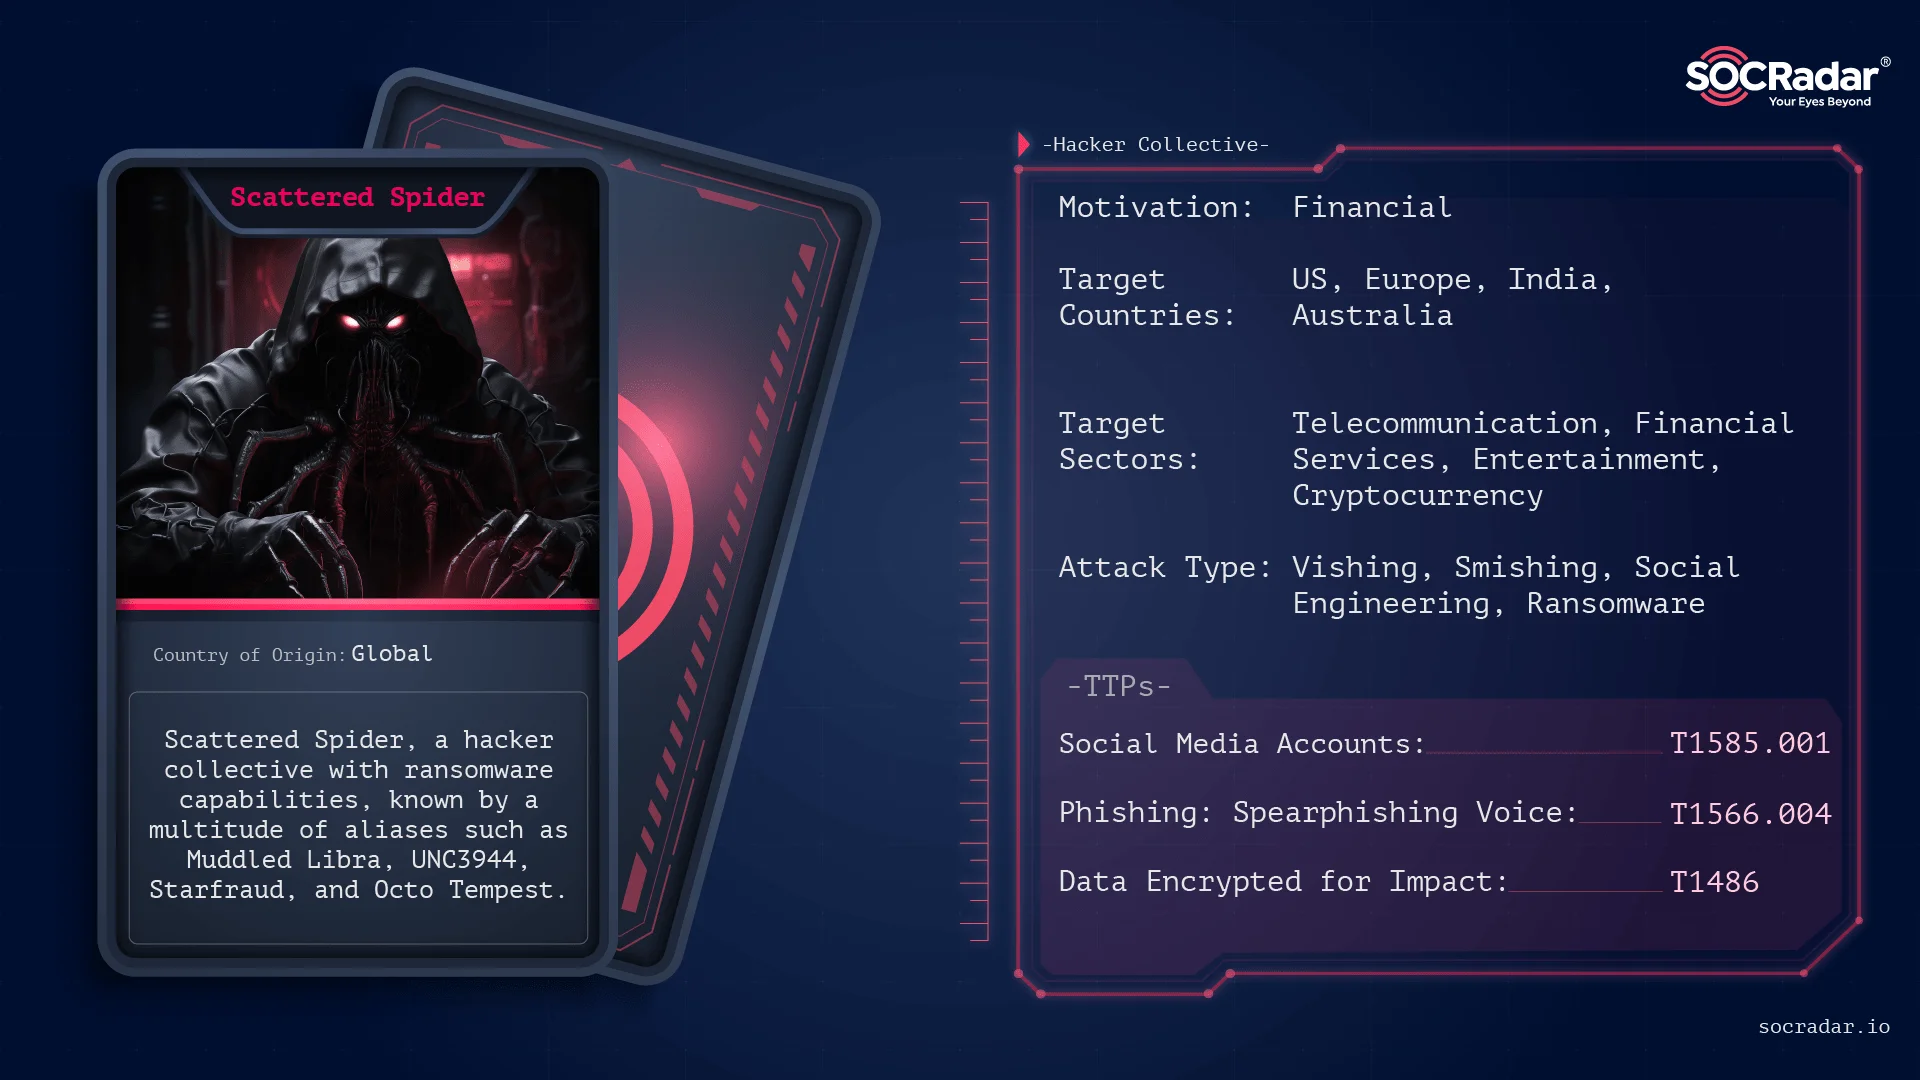 Threat actor card of Scattered Spider